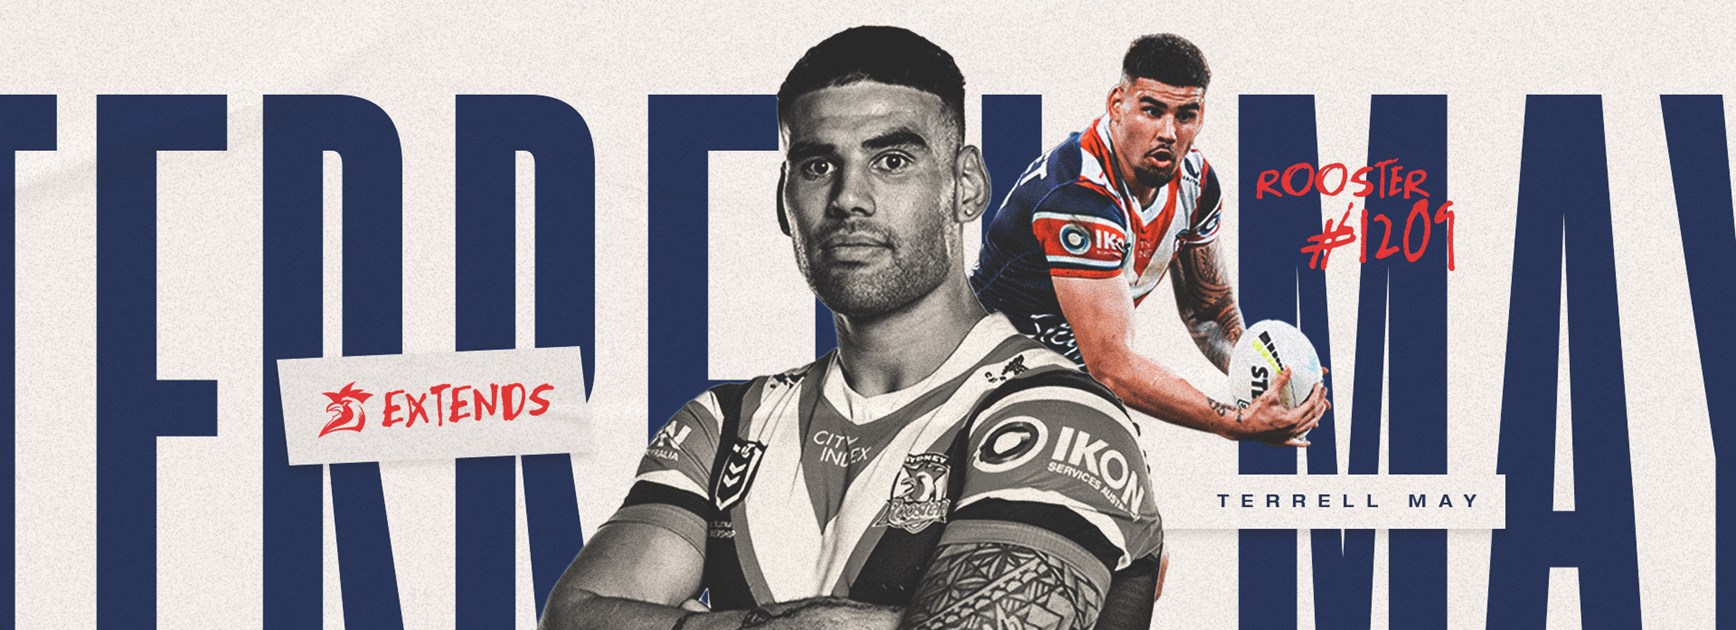 Roosters Secure Terrell May for Two More Years